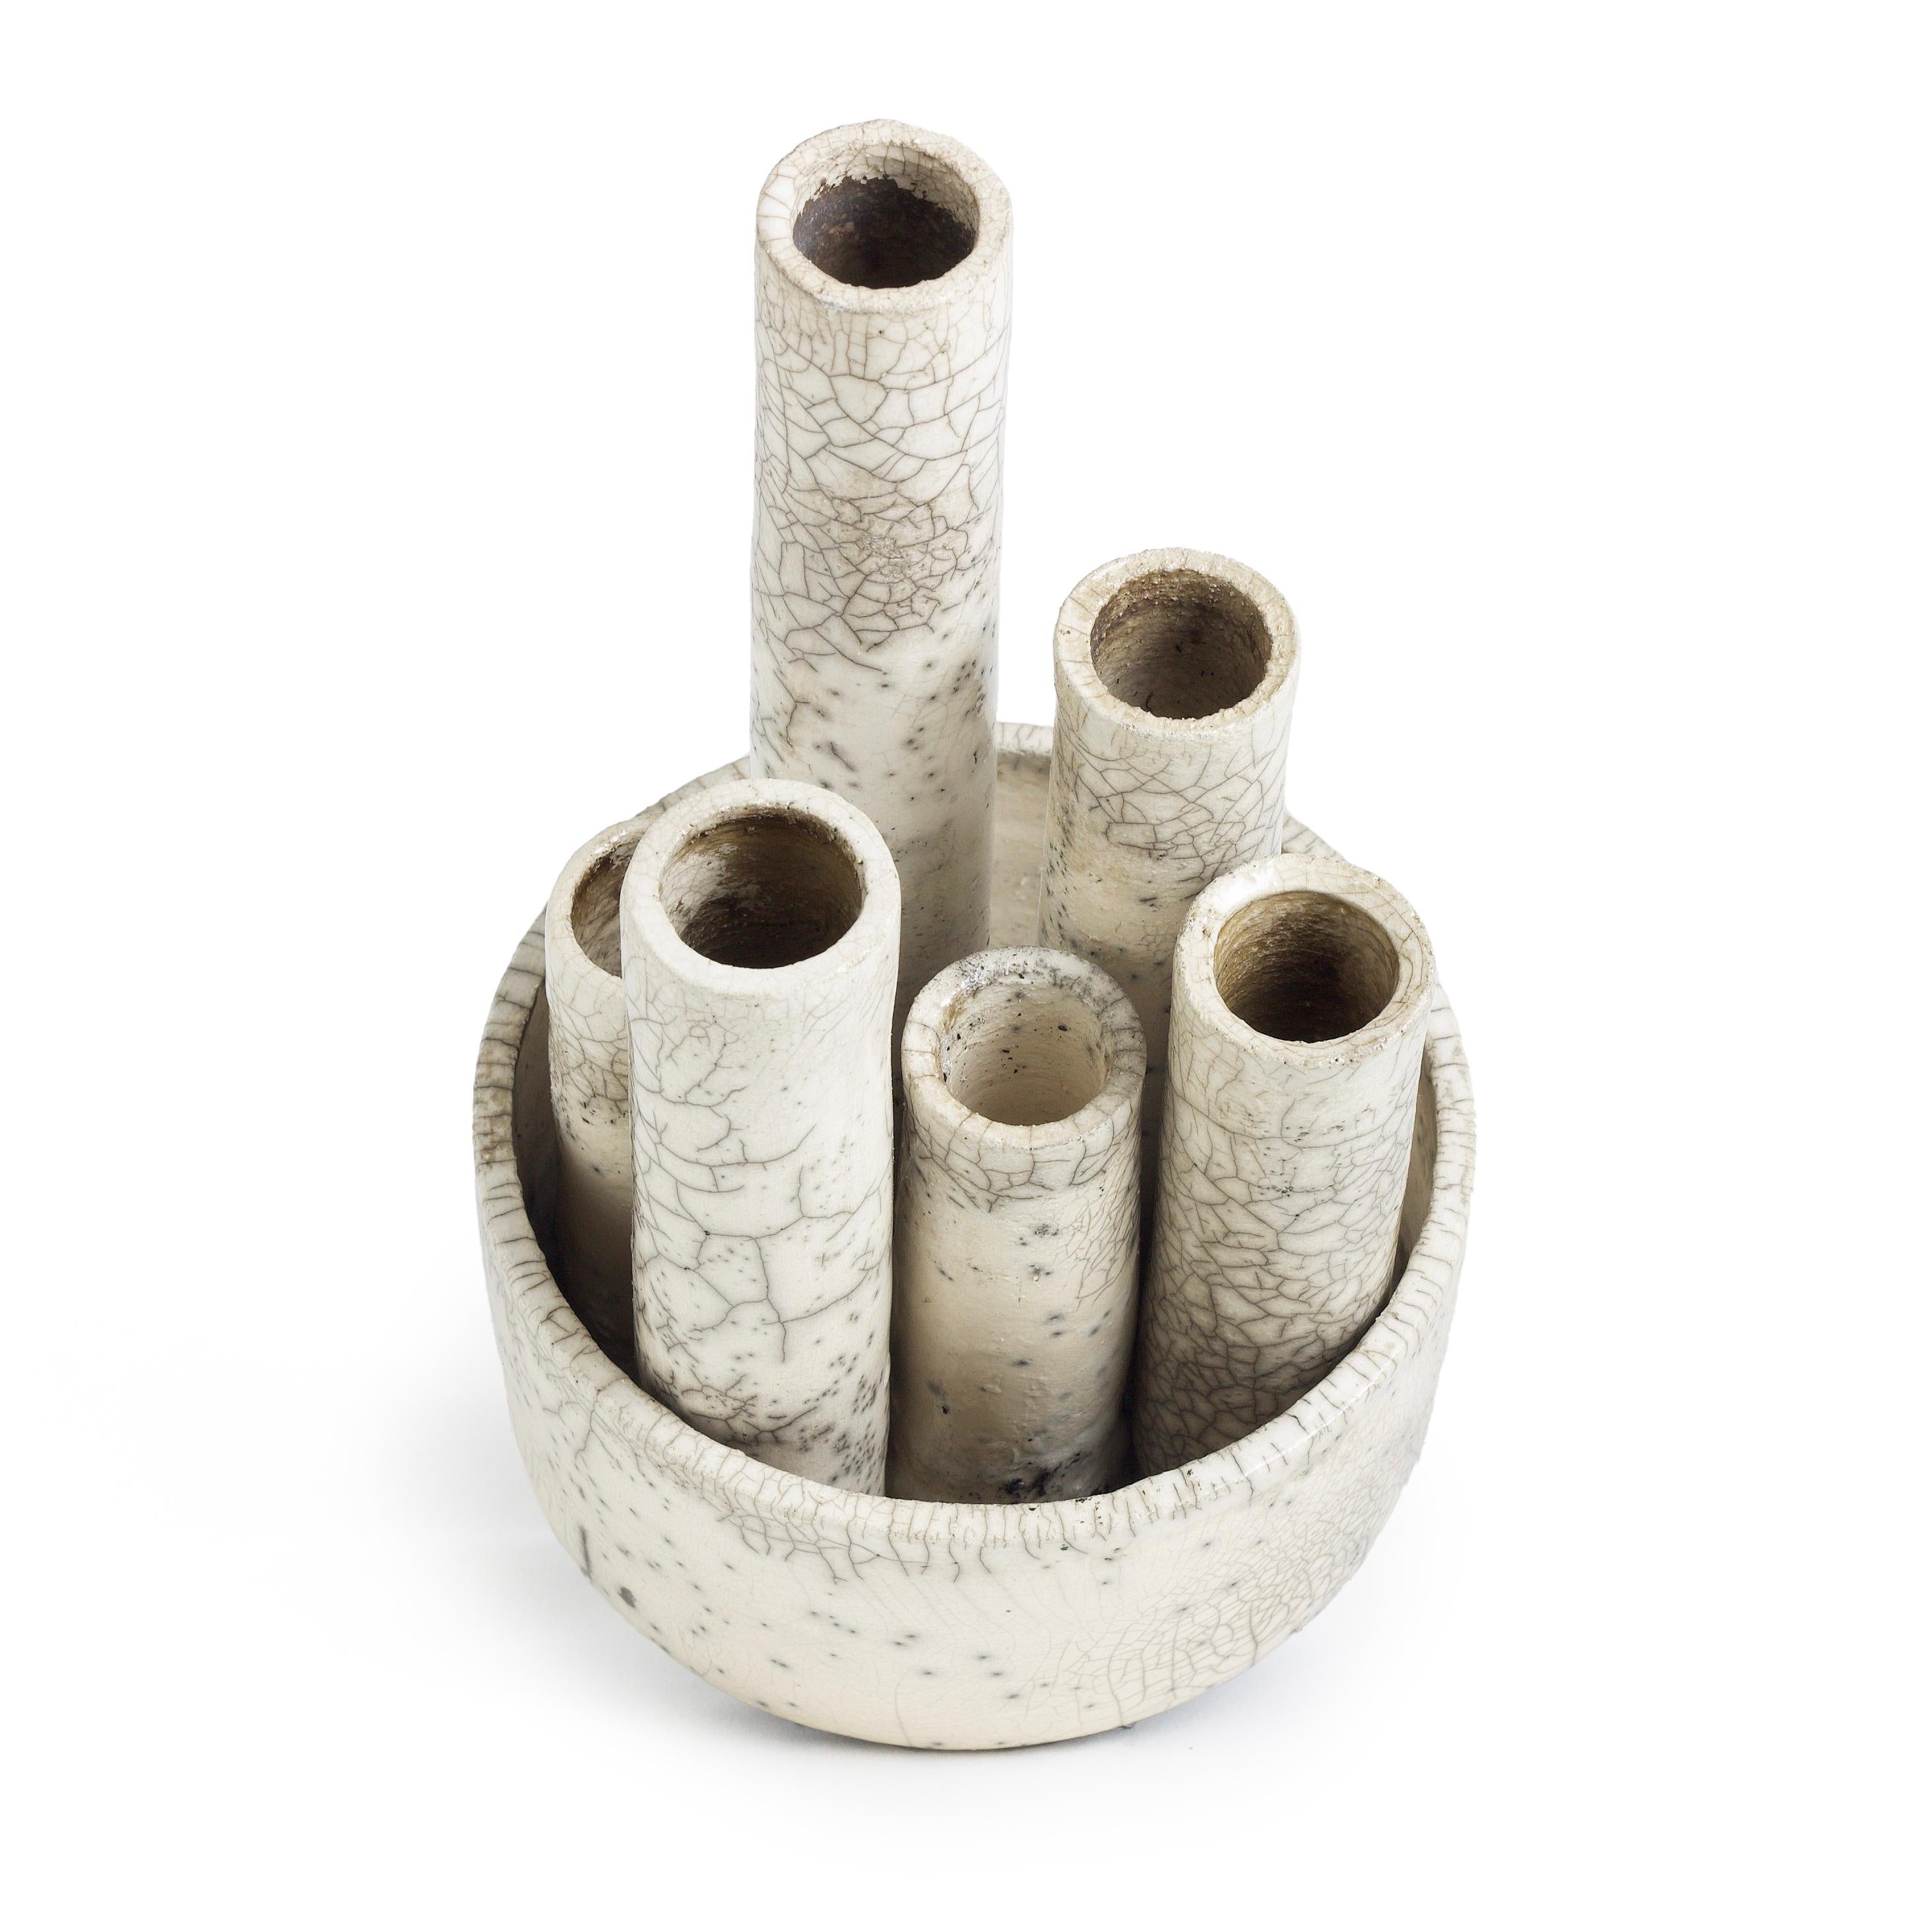 Modern Metropolis M Candle Holder Sculpture Raku Ceramic White Crakle In New Condition For Sale In monza, Monza and Brianza